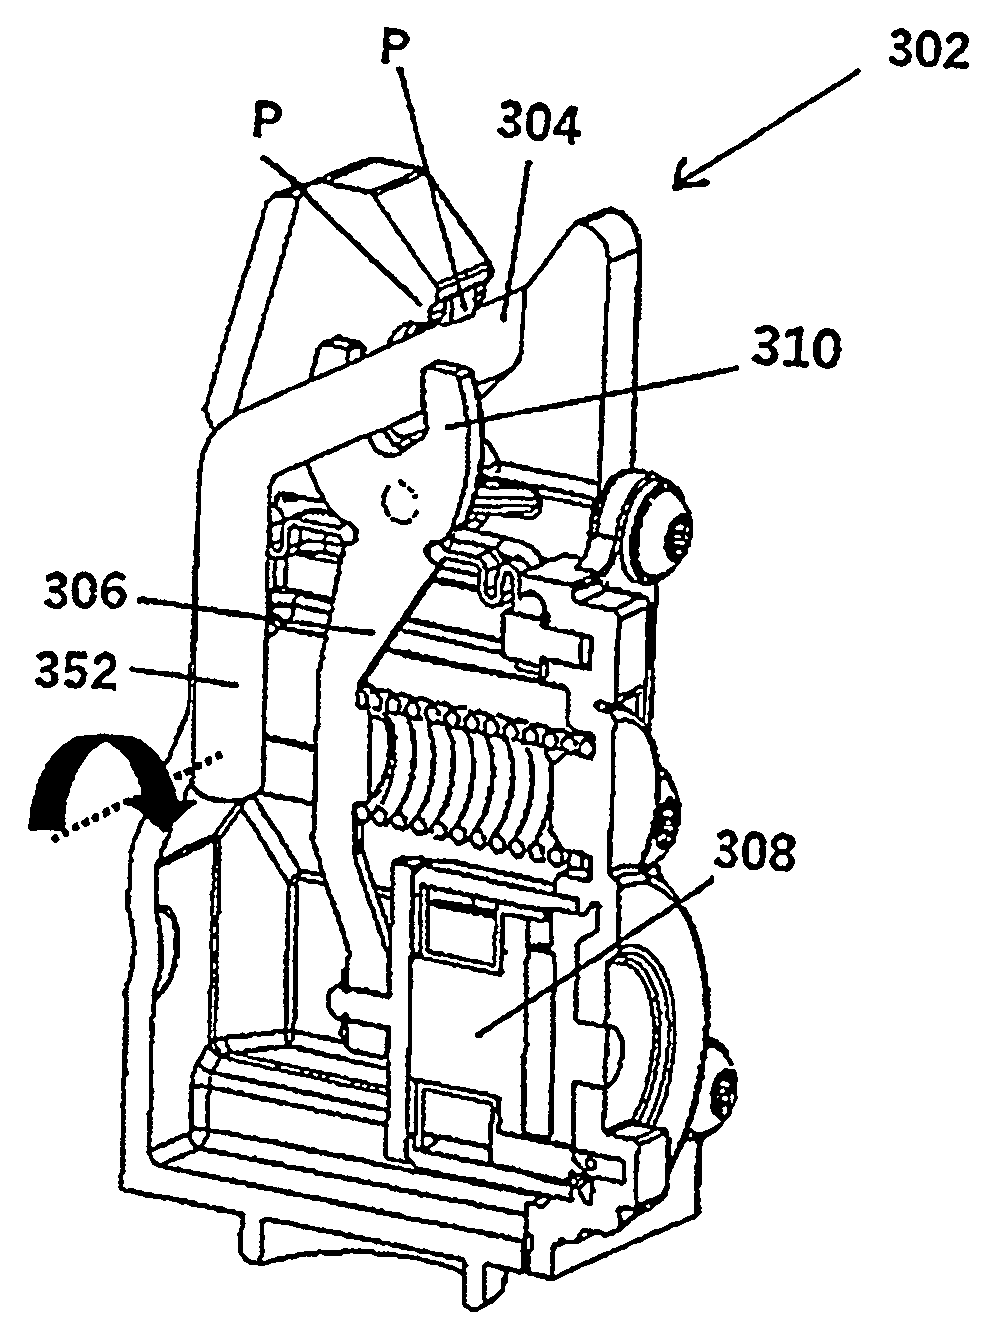 Releasable holding mechanism and method of use